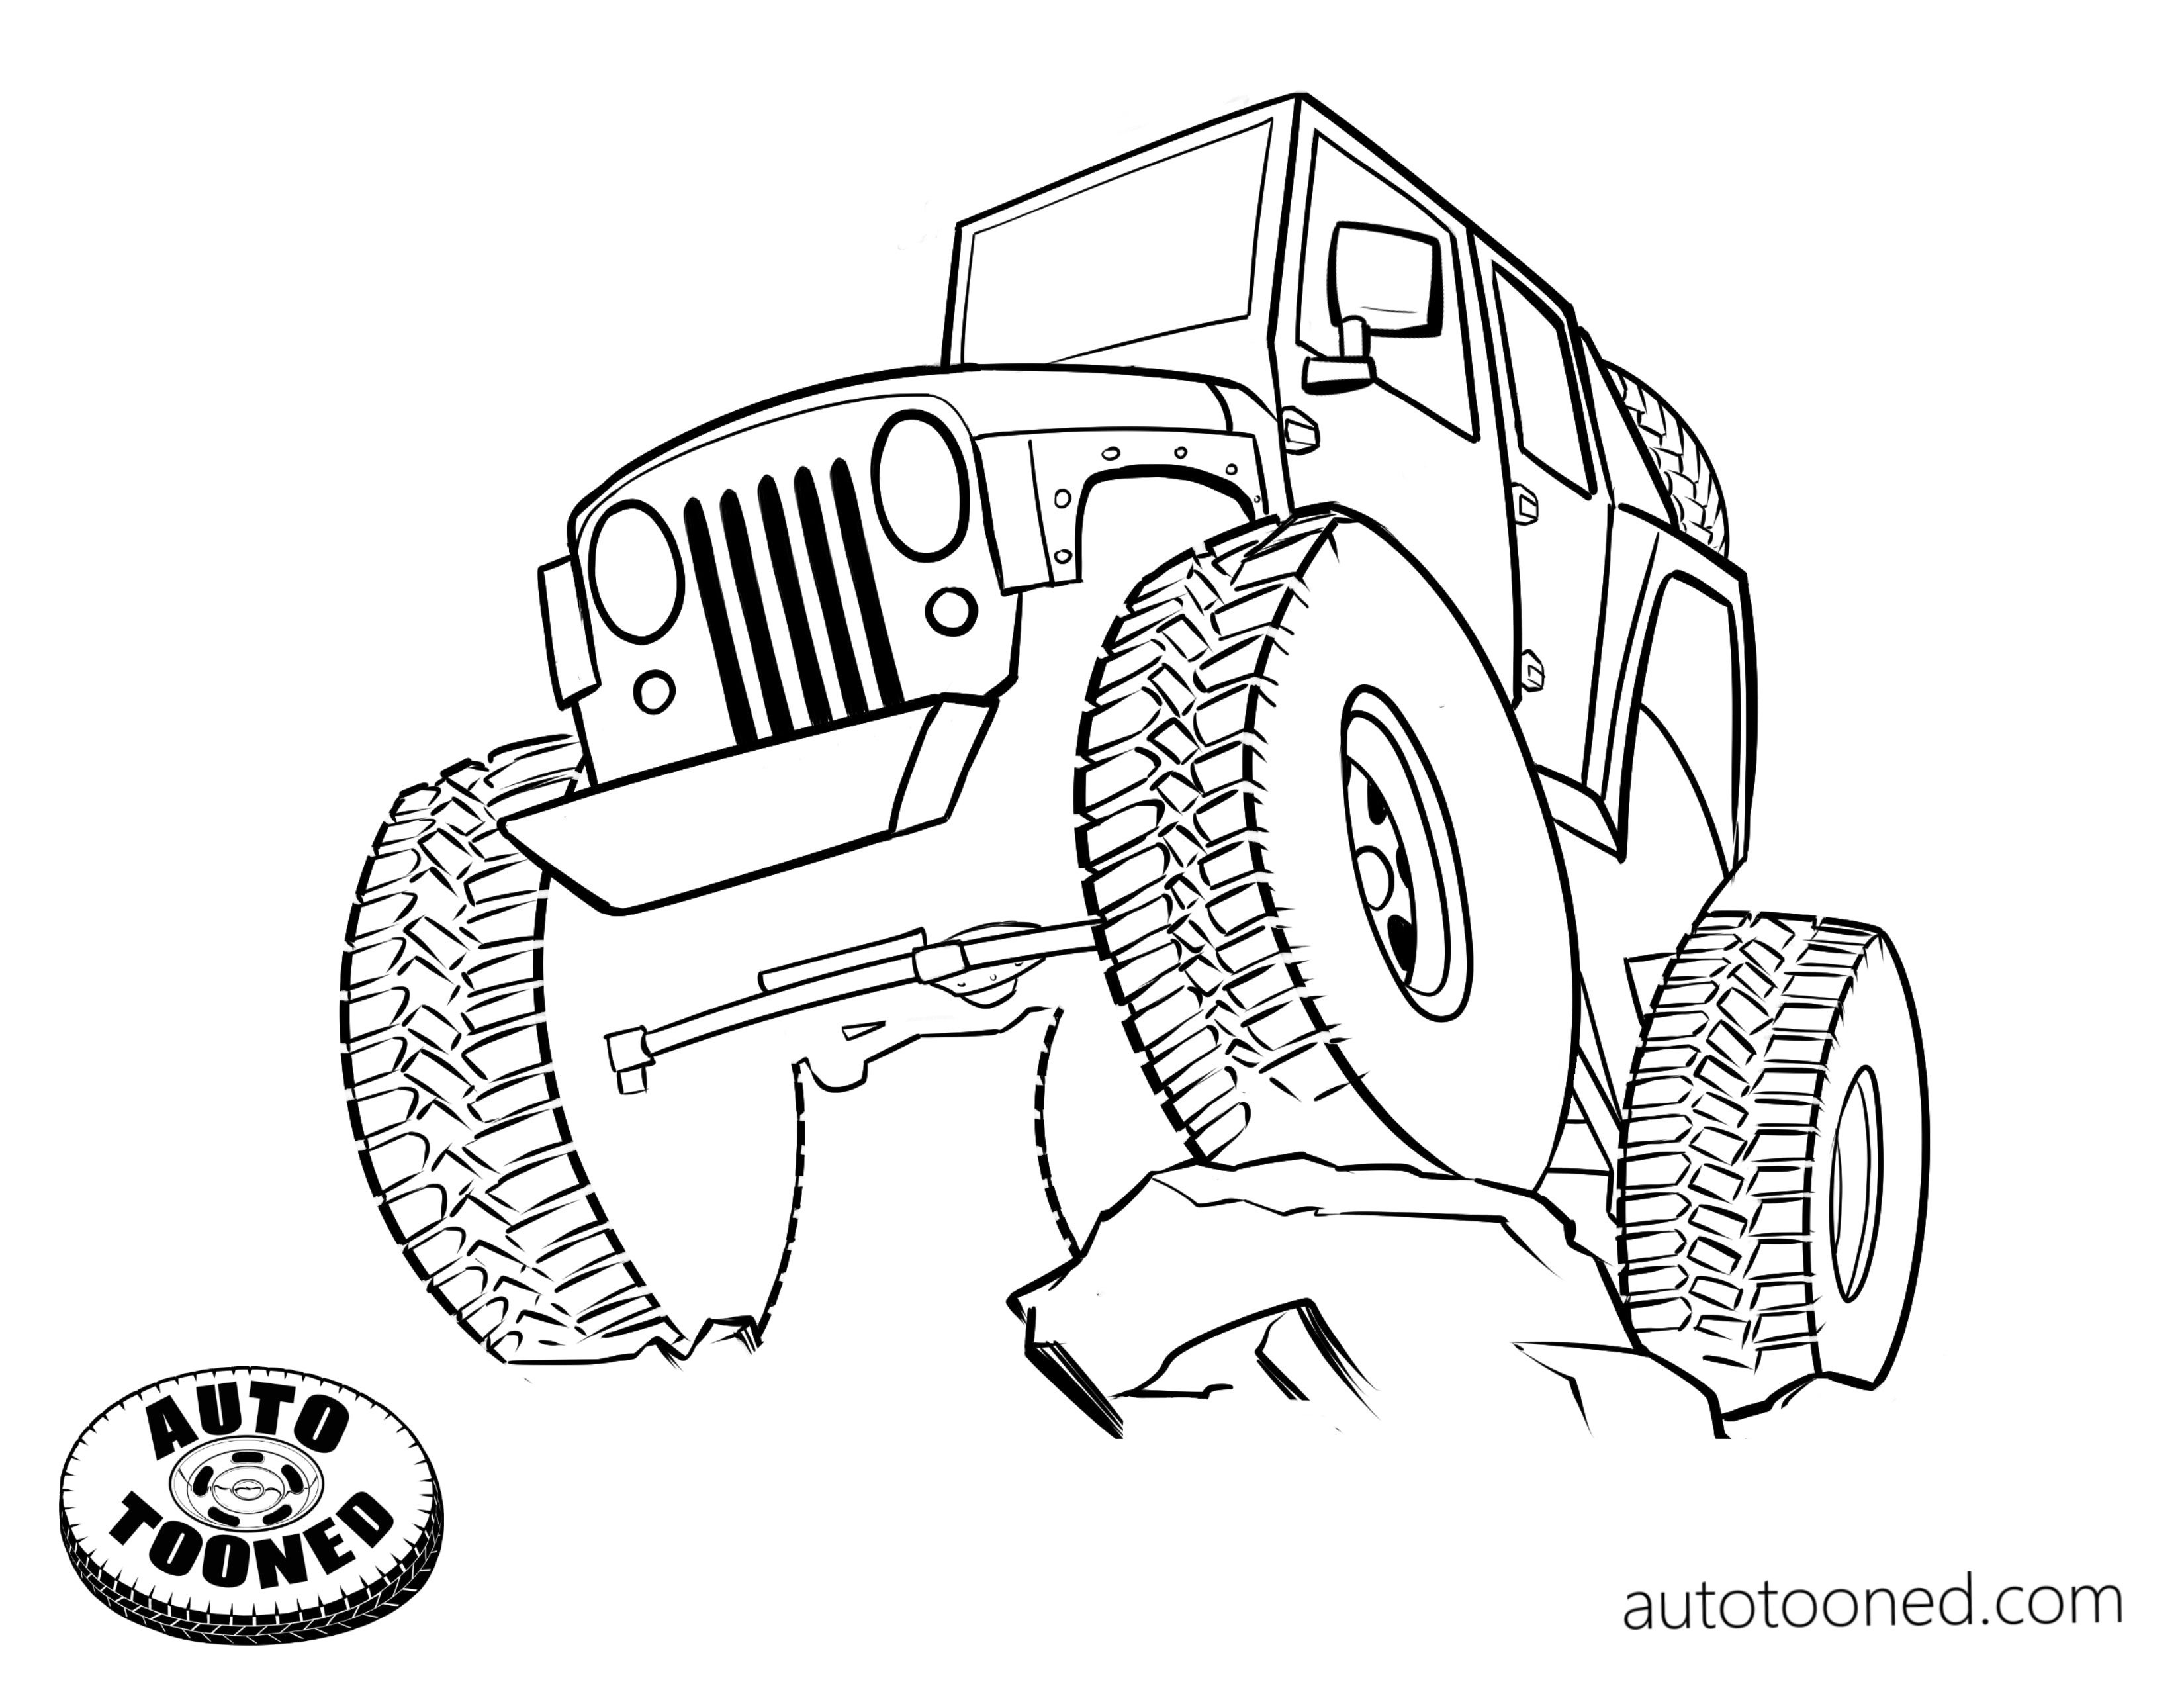 Free coloring pages â auto tooned